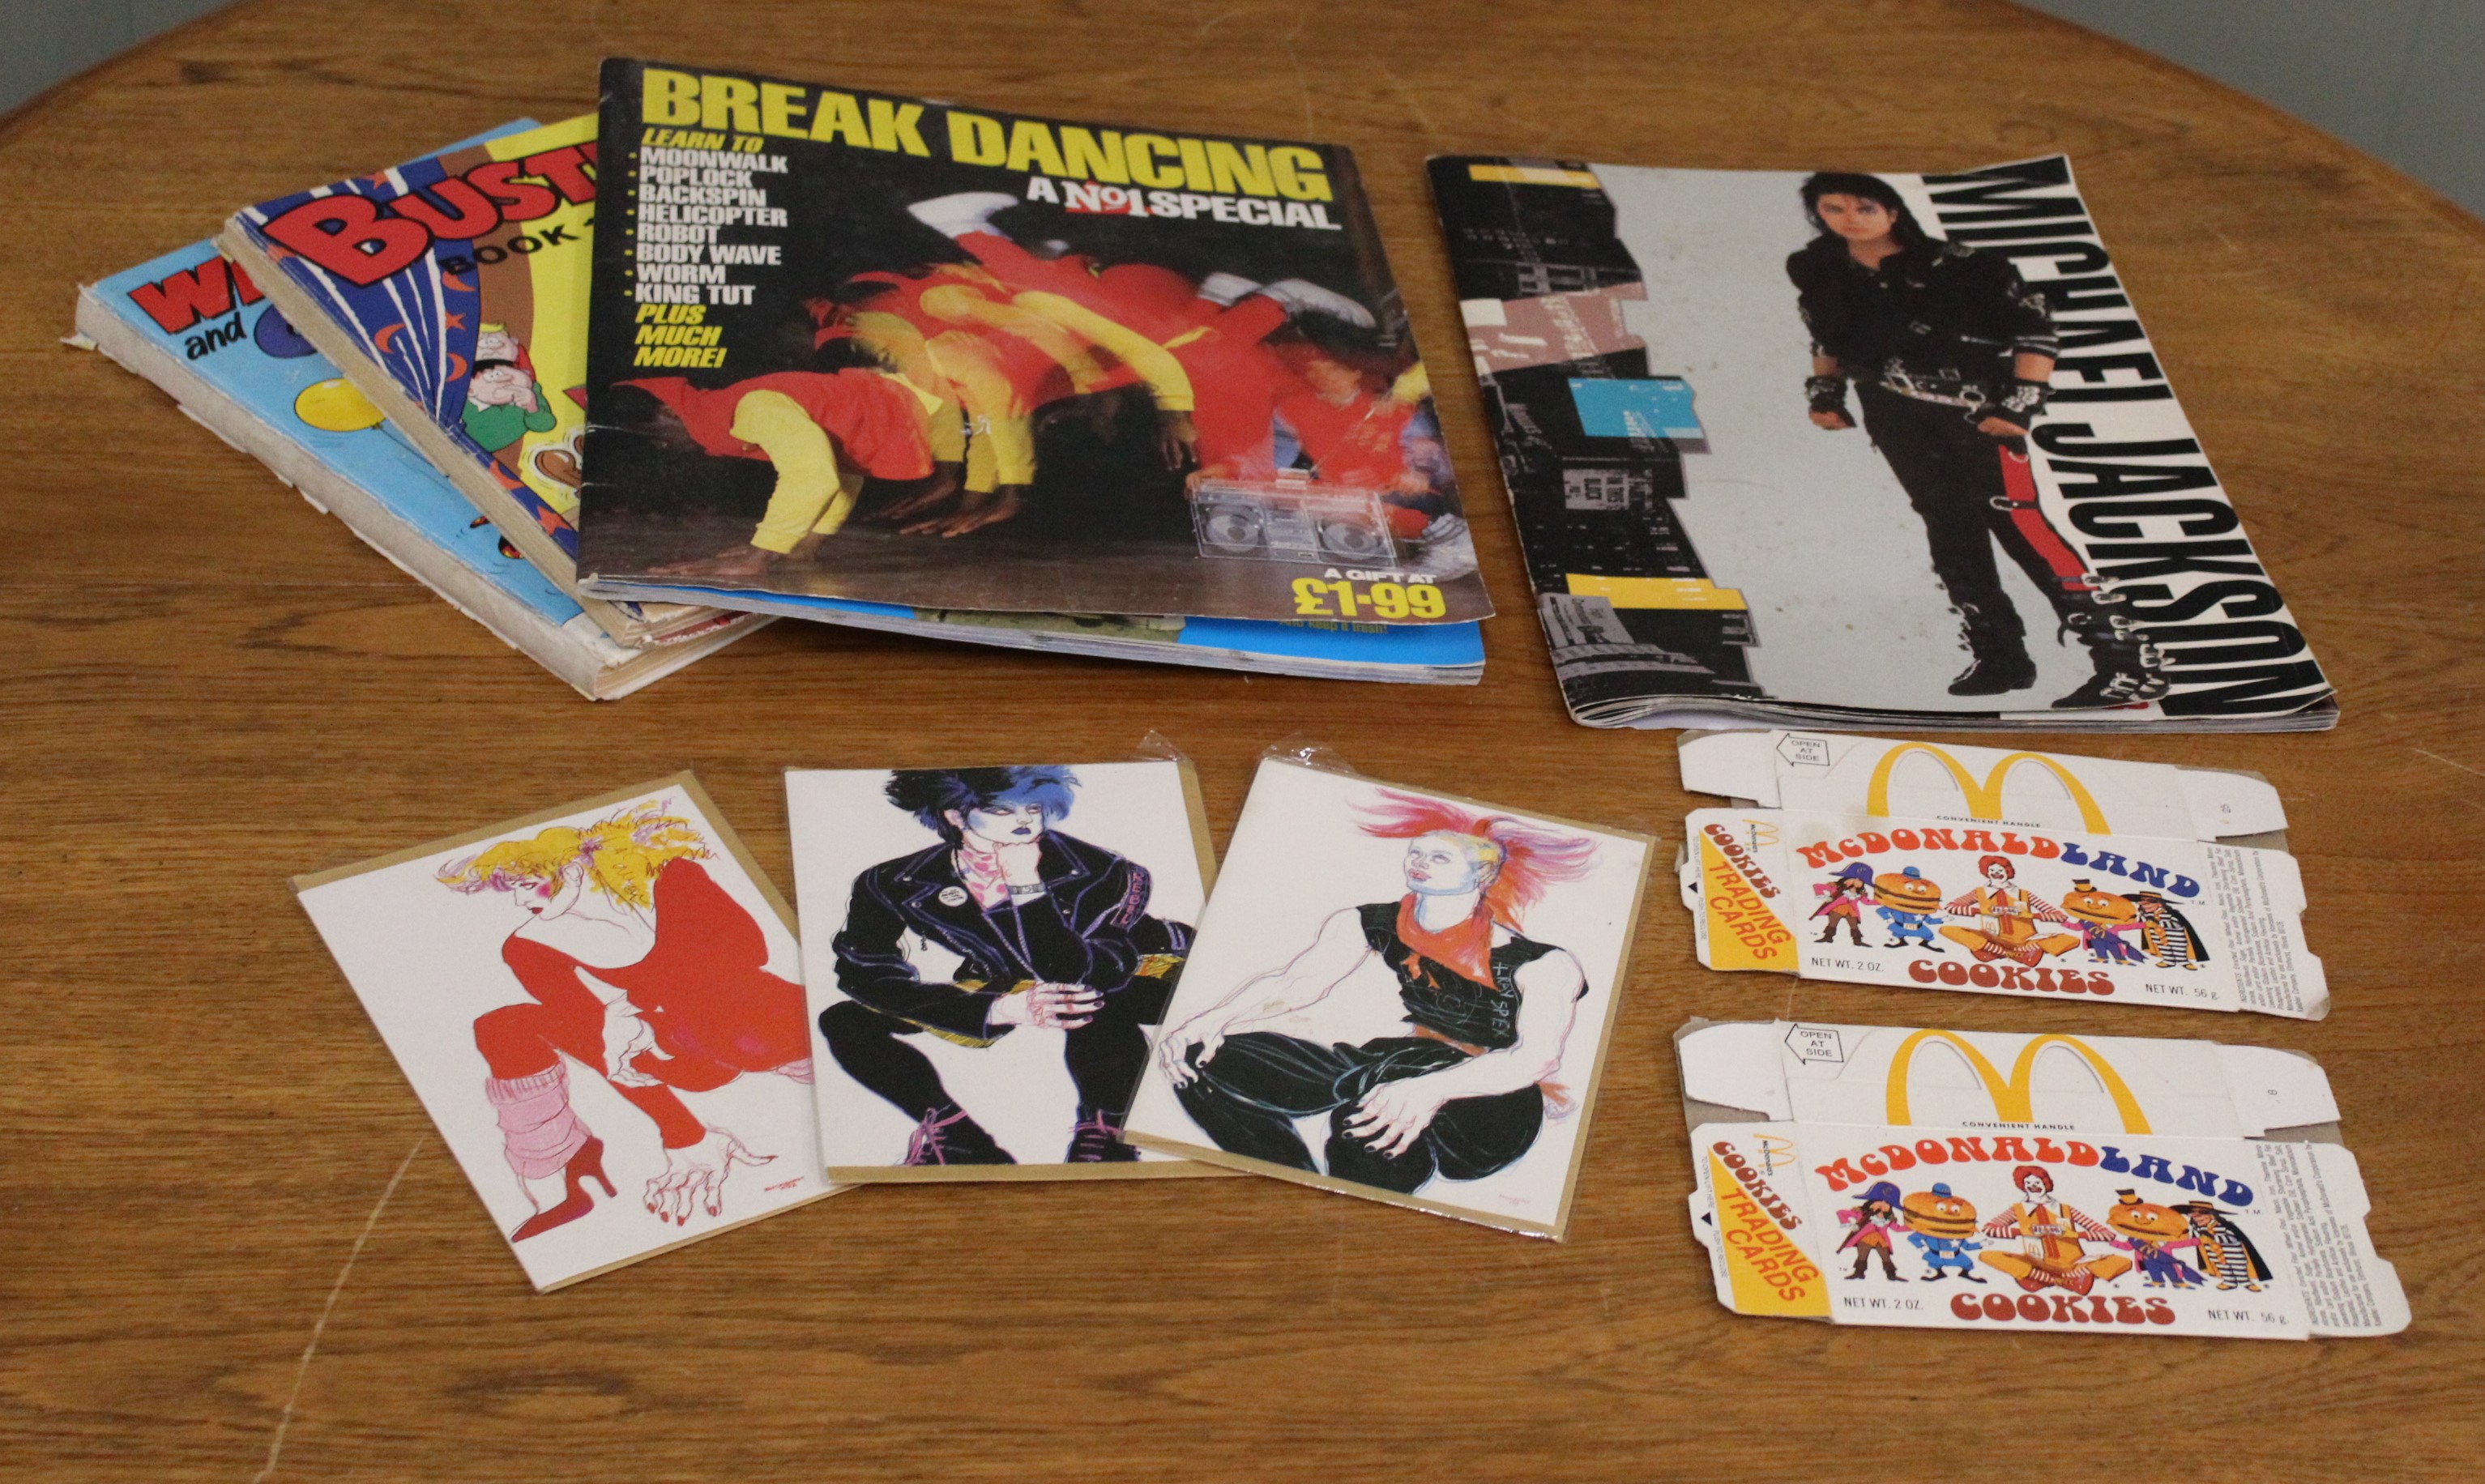 A collection of 1980's memorabilia including first edition of Breakdancing magazine,